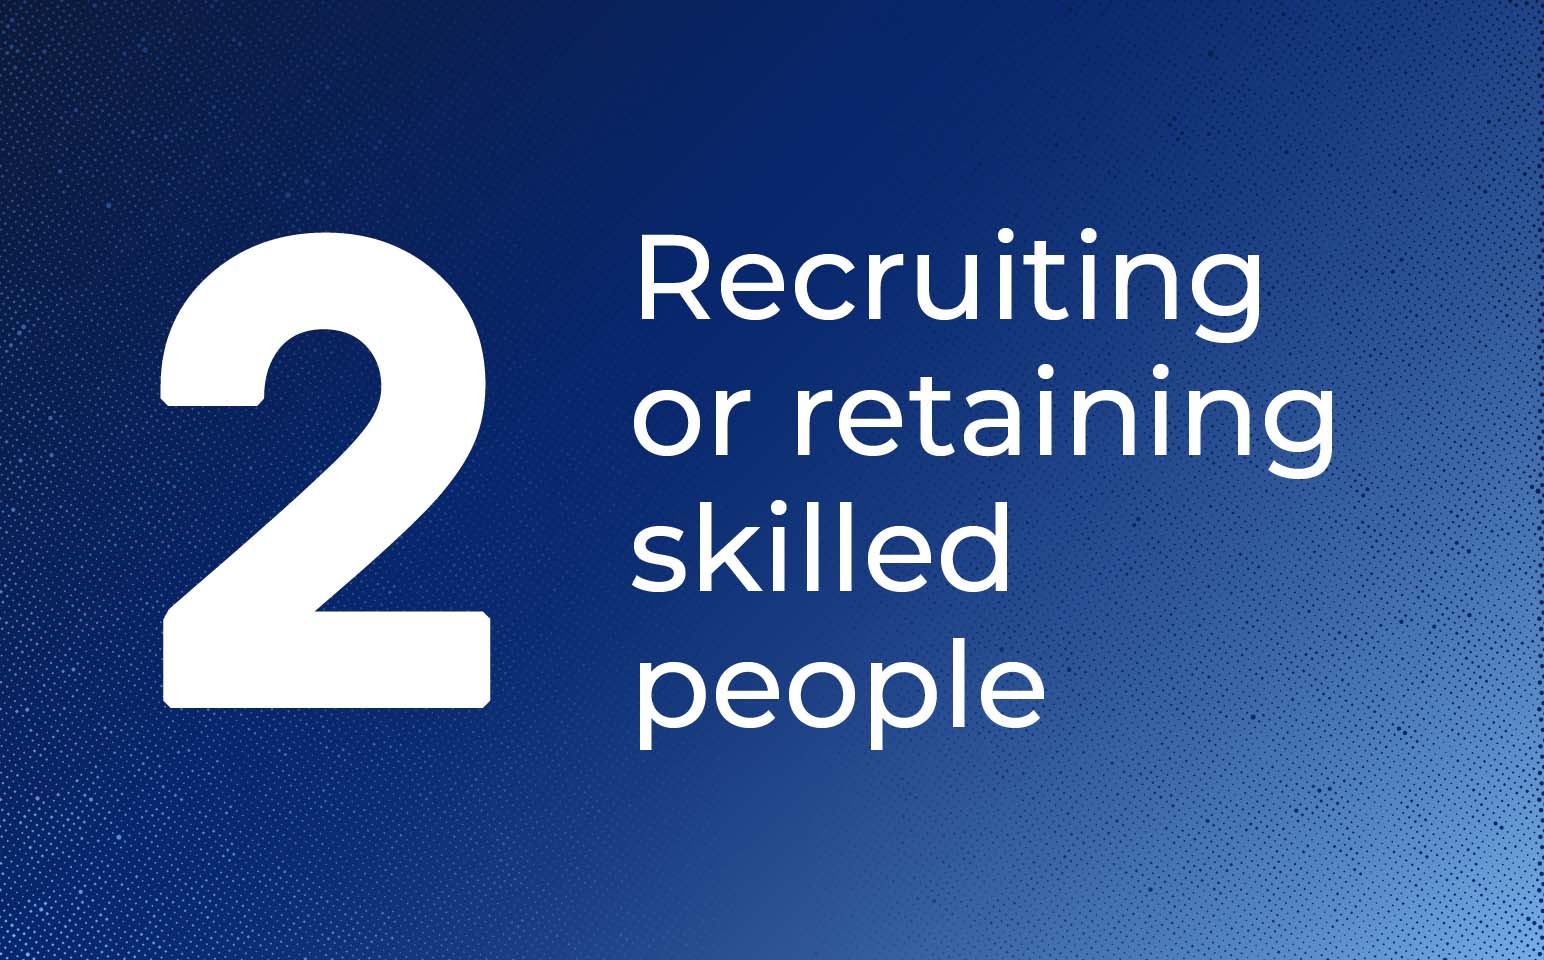 Challenge 2 – Recruiting or retaining skilled people